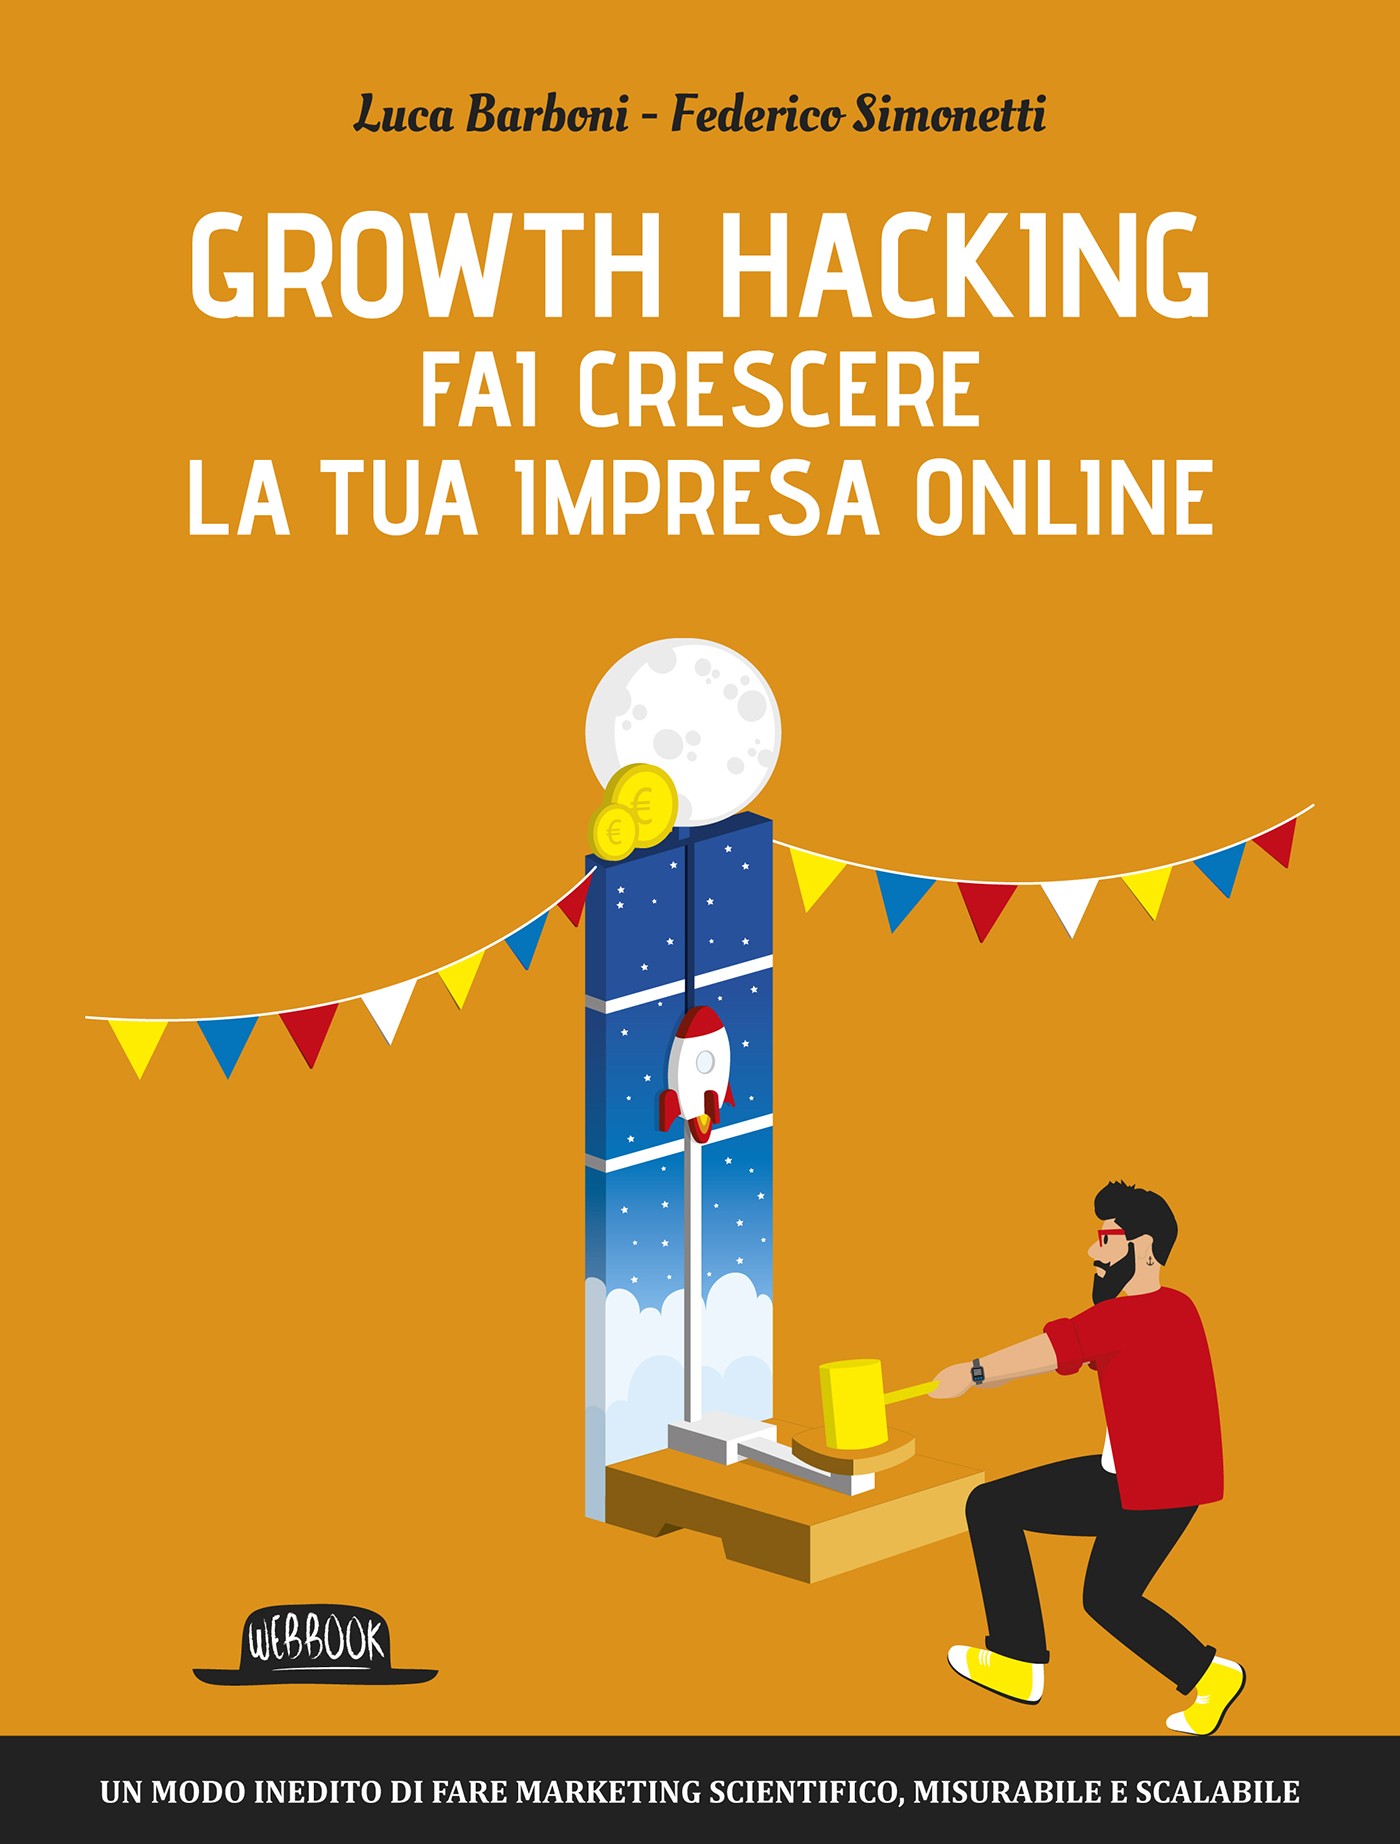 Growth Hacking - Librerie.coop